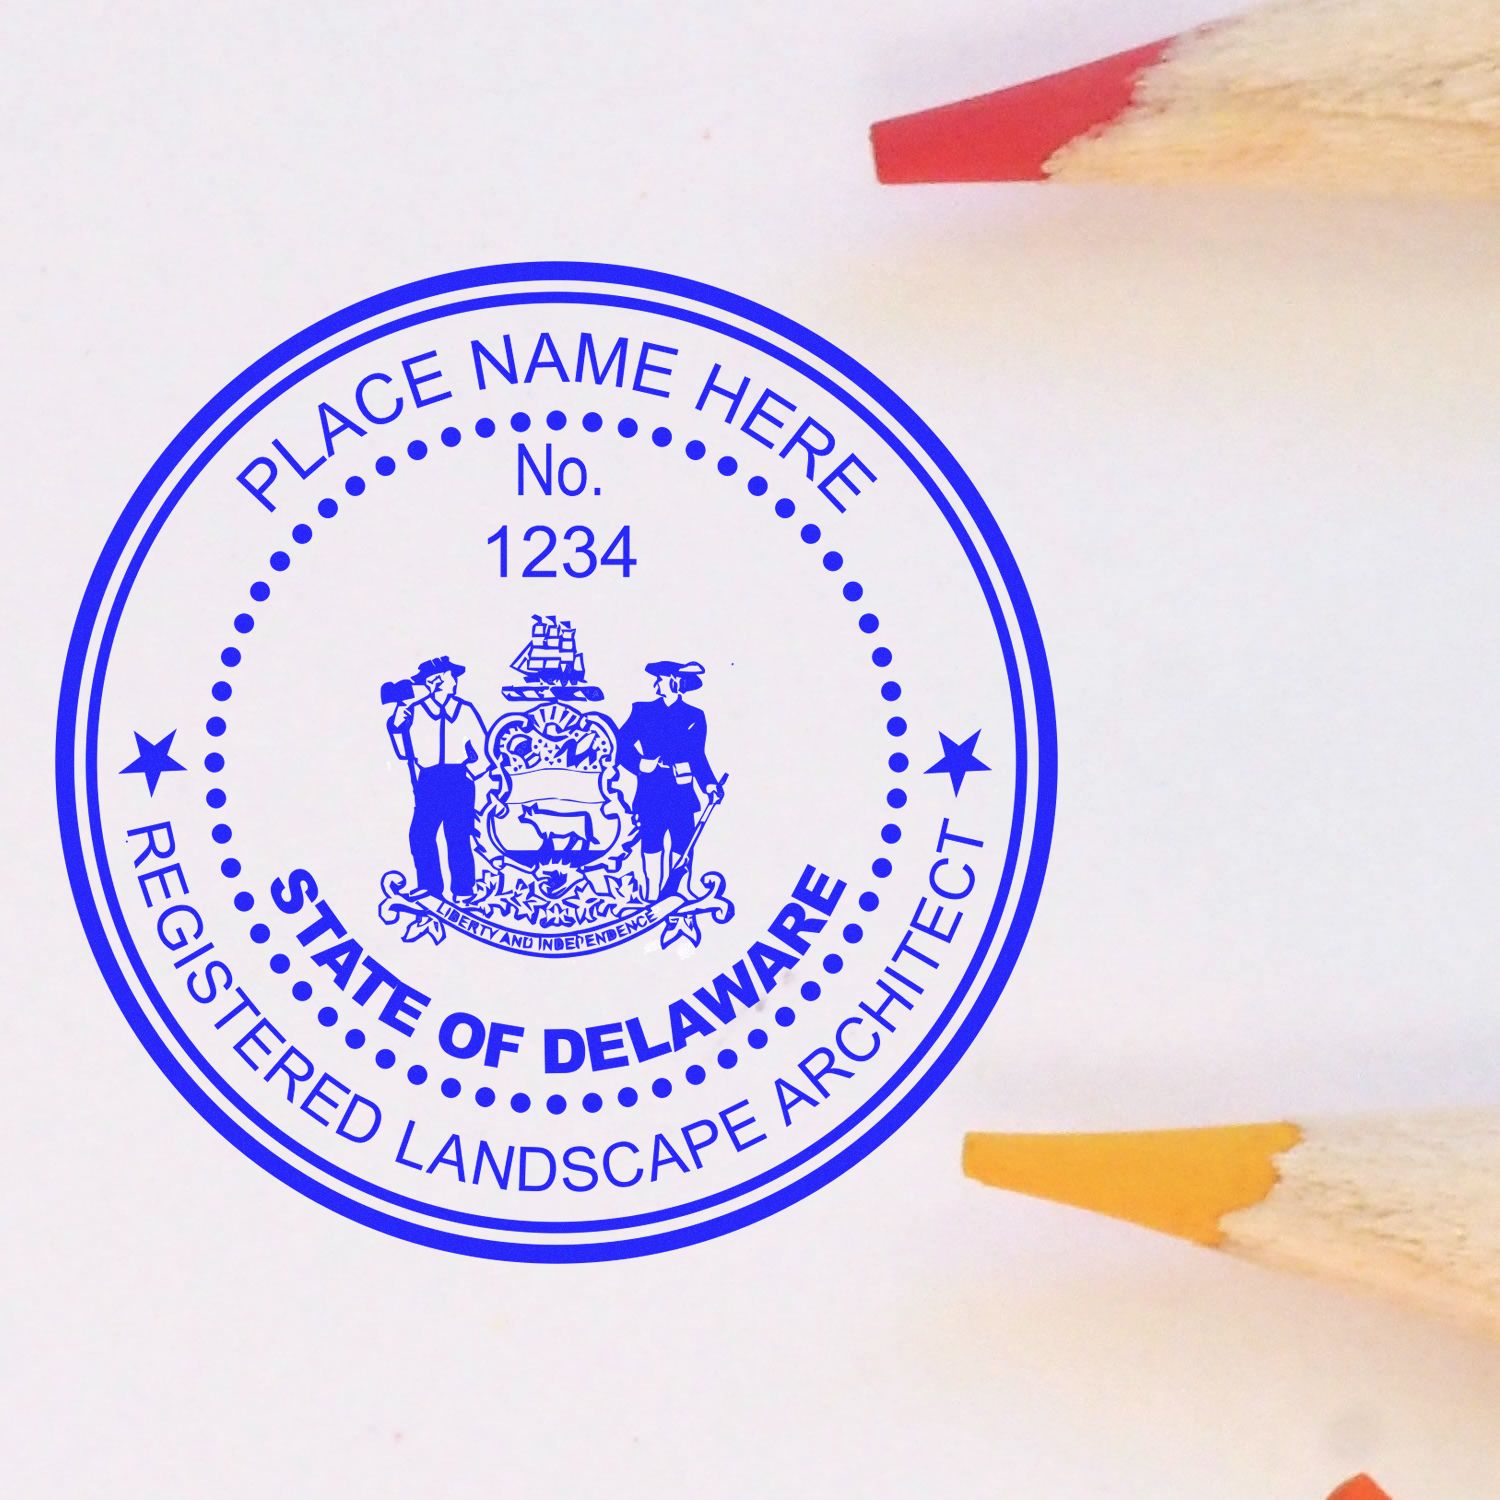 This paper is stamped with a sample imprint of the Self-Inking Delaware Landscape Architect Stamp, signifying its quality and reliability.